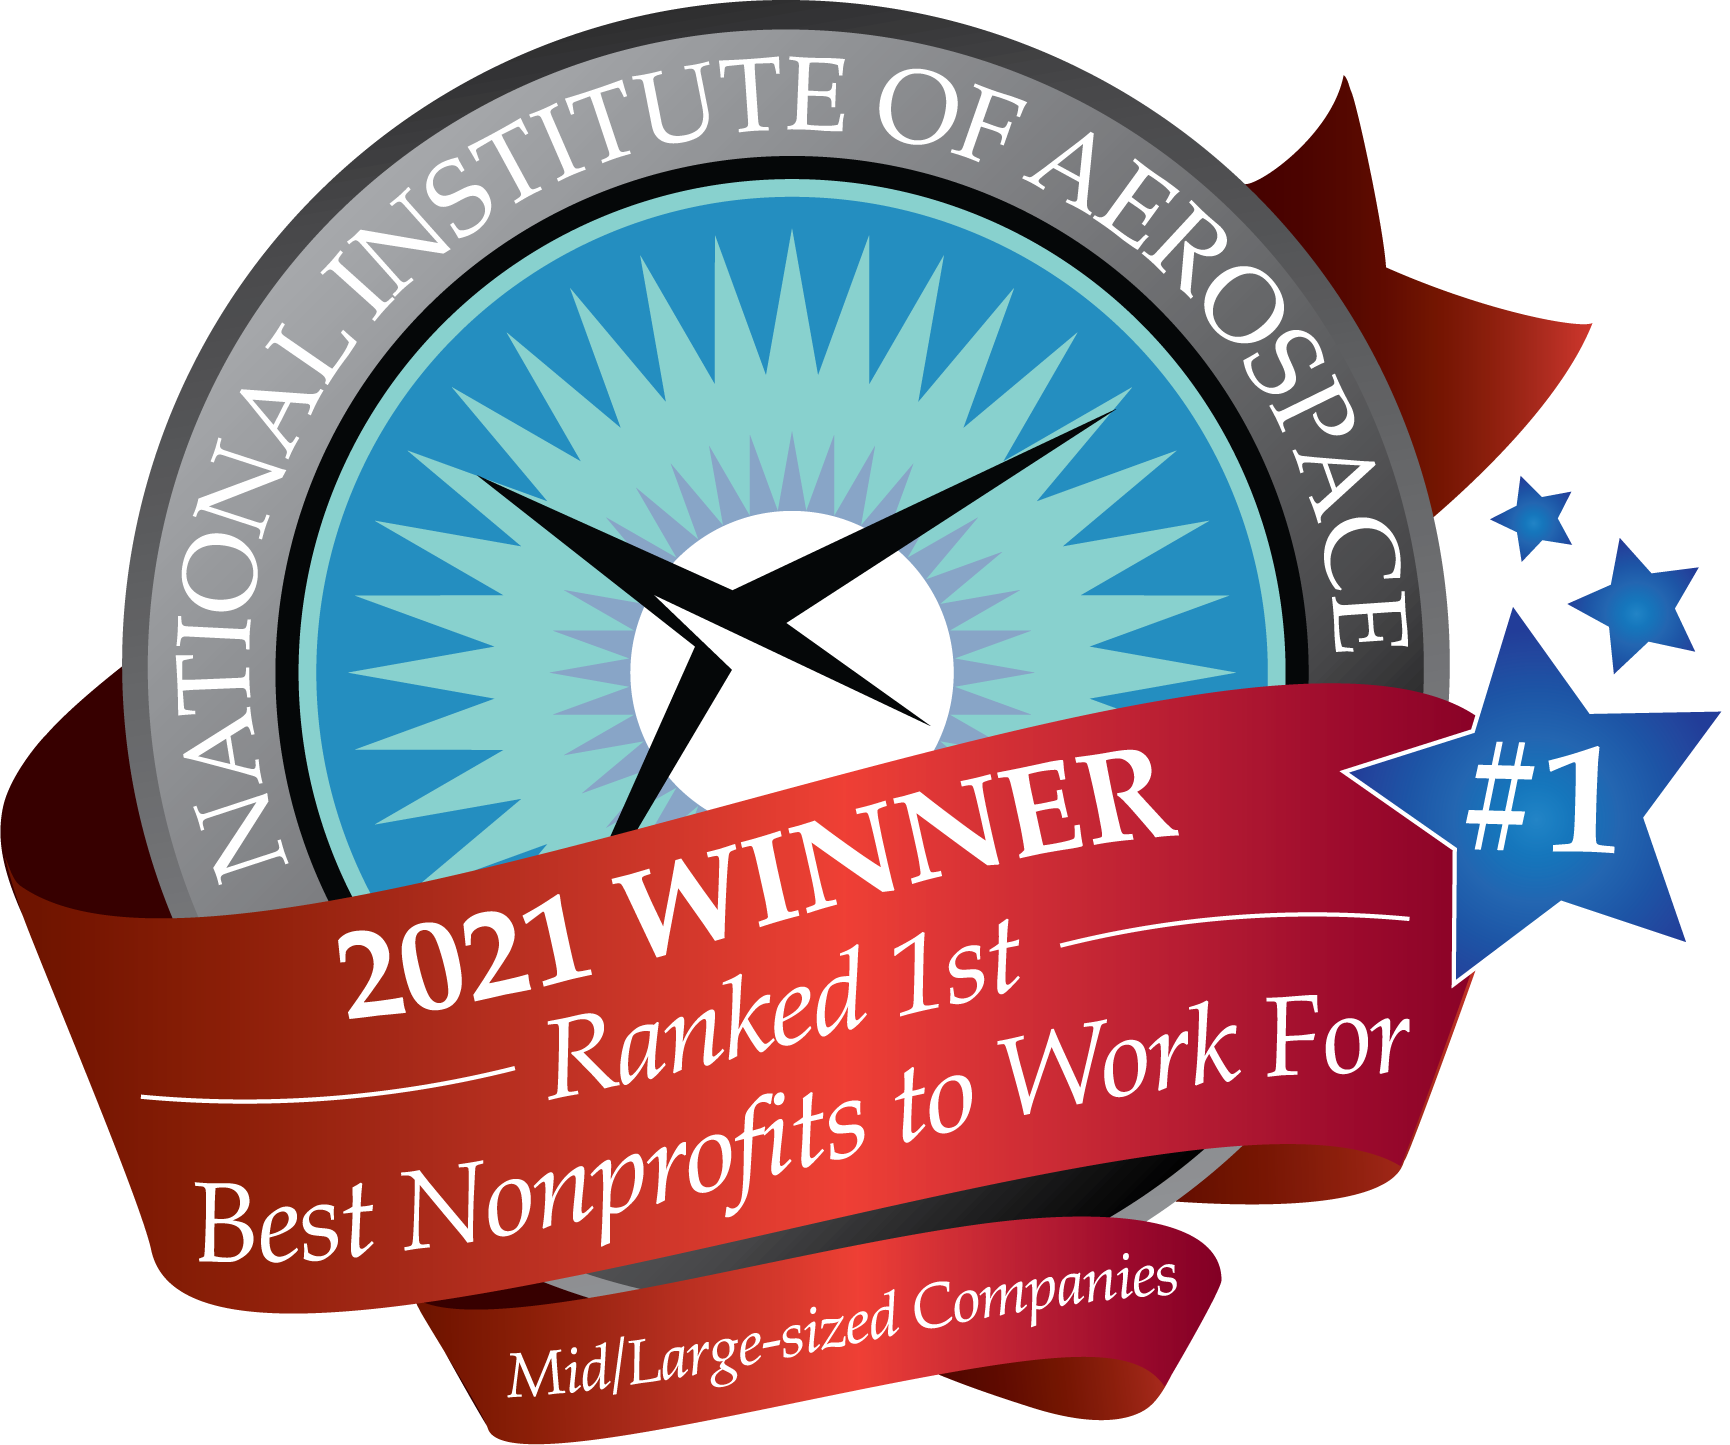 The NonProfit Times has ranked the National Institute of Aerospace (NIA) as the Best NonProfit to Work For in the Nation among mid- and large-sized companies.